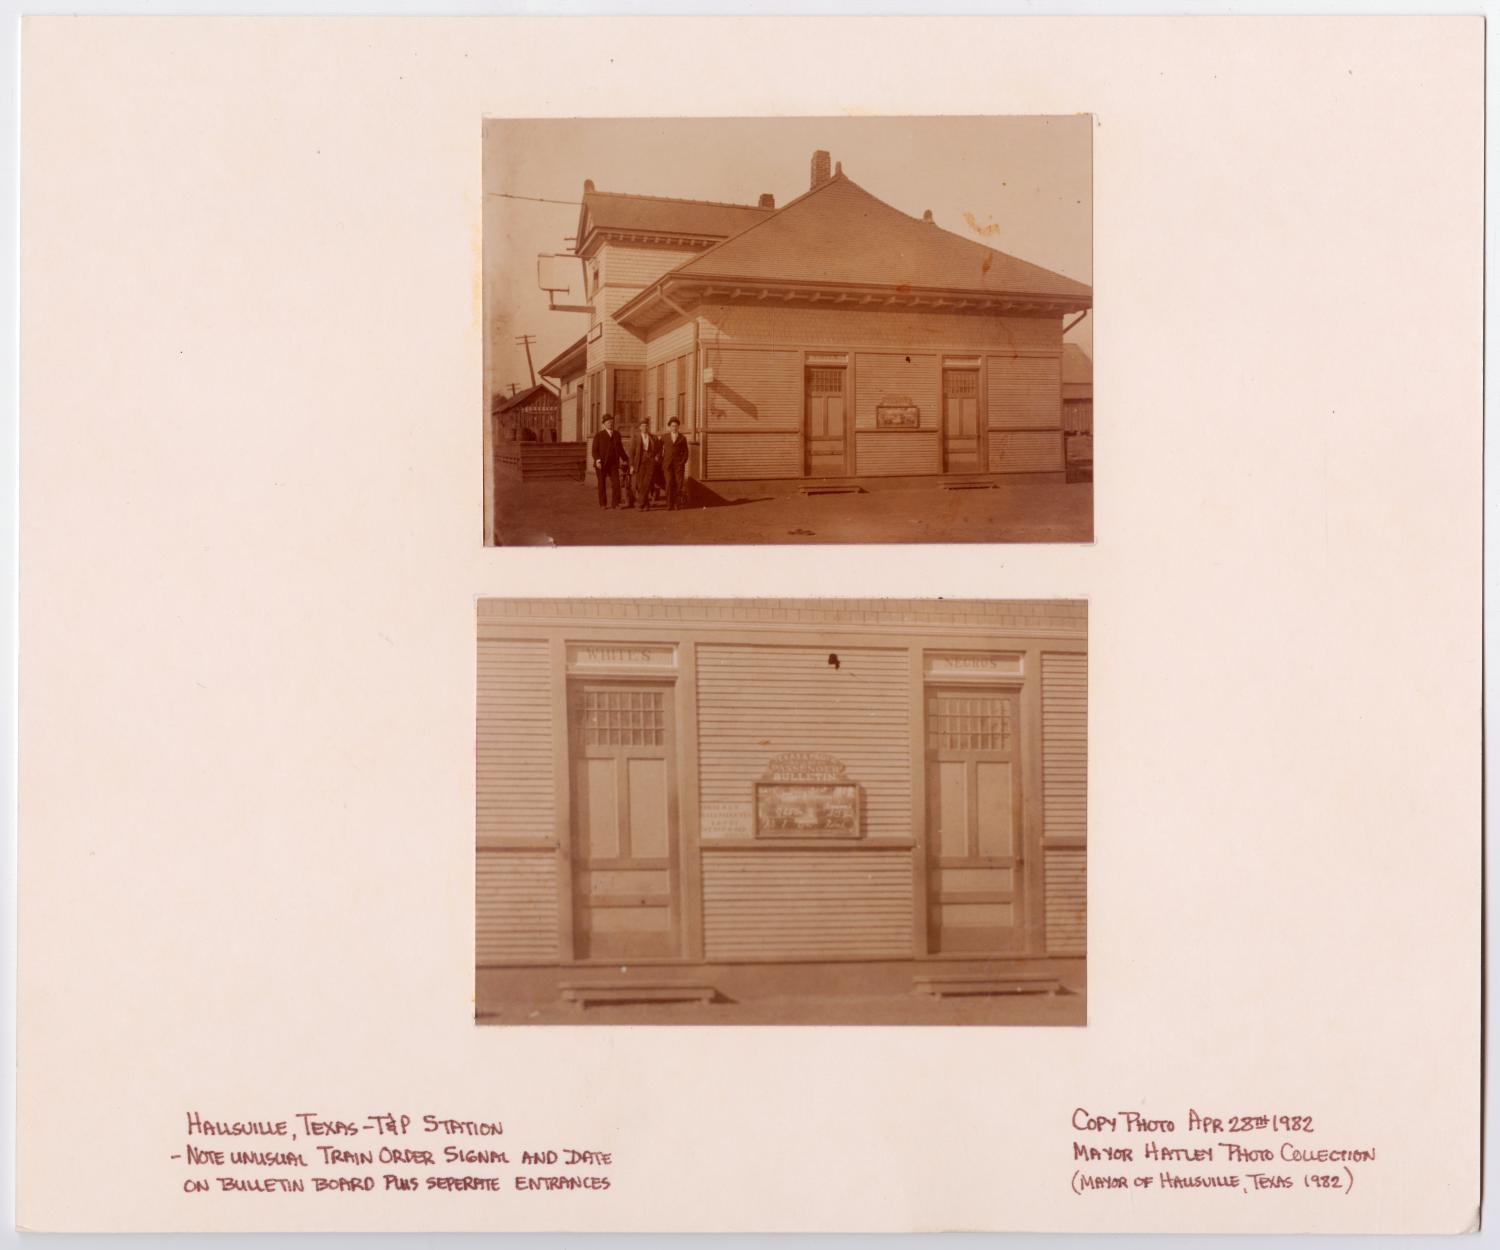 Images of Texas & Pacific Stations and Structures in  Hallsville, TX